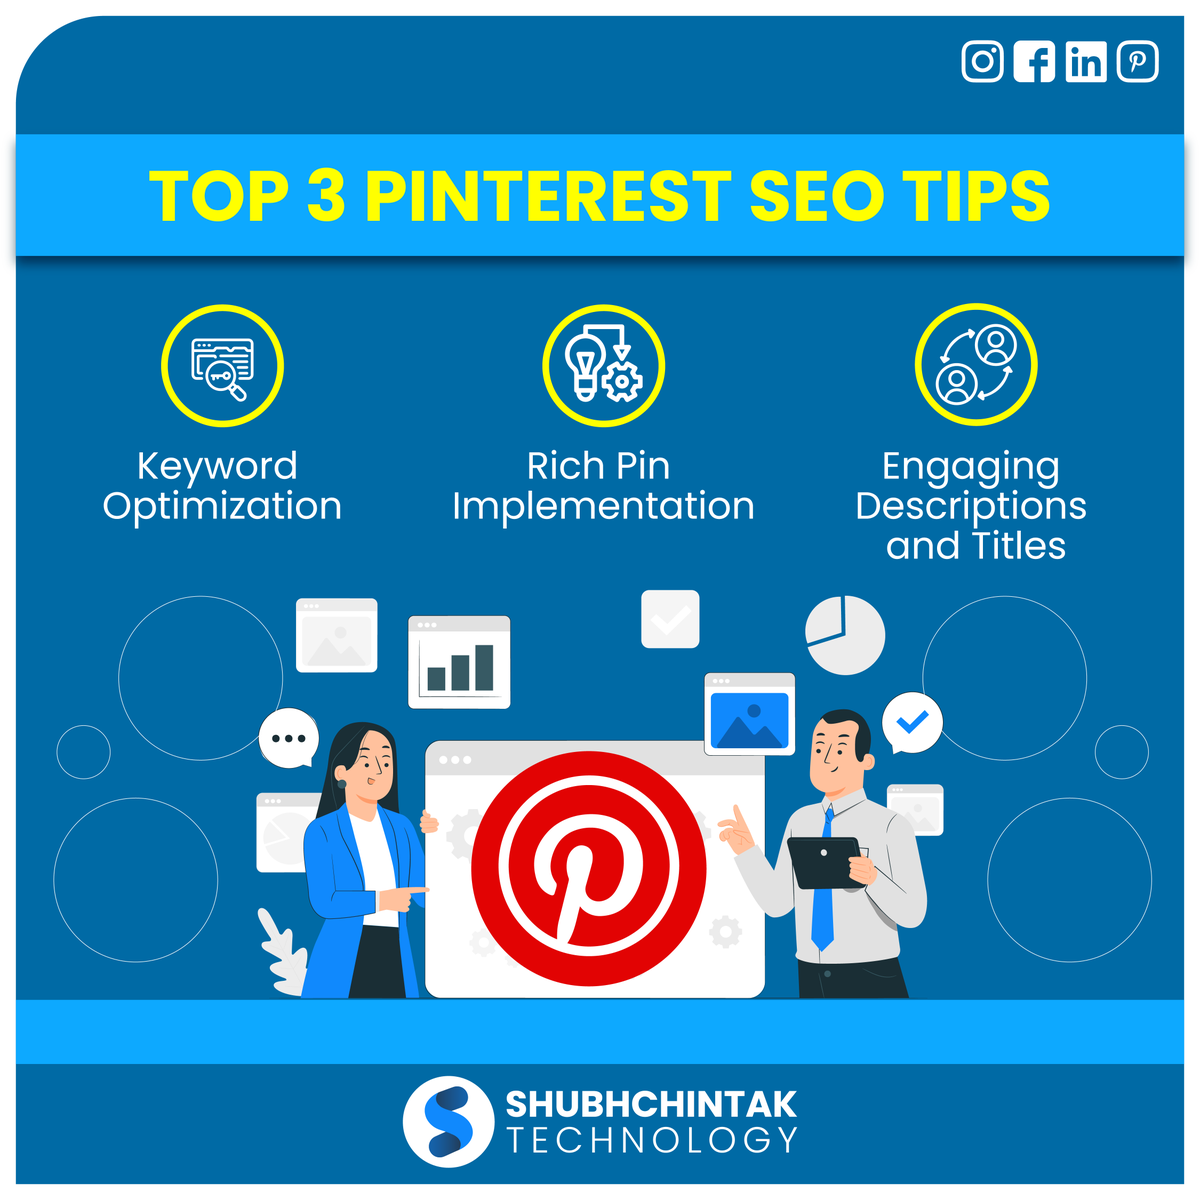 Optimizing your Pinterest profile and pins for search is the key to unlocking the power of Pinterest as a traffic-driving platform. 🎯 #pinterest #pinterestseo ##pinterestprofileoptimization #Digitalmarketing #Shubhchintaktechnology #digitalagency #India #mumbai #pune